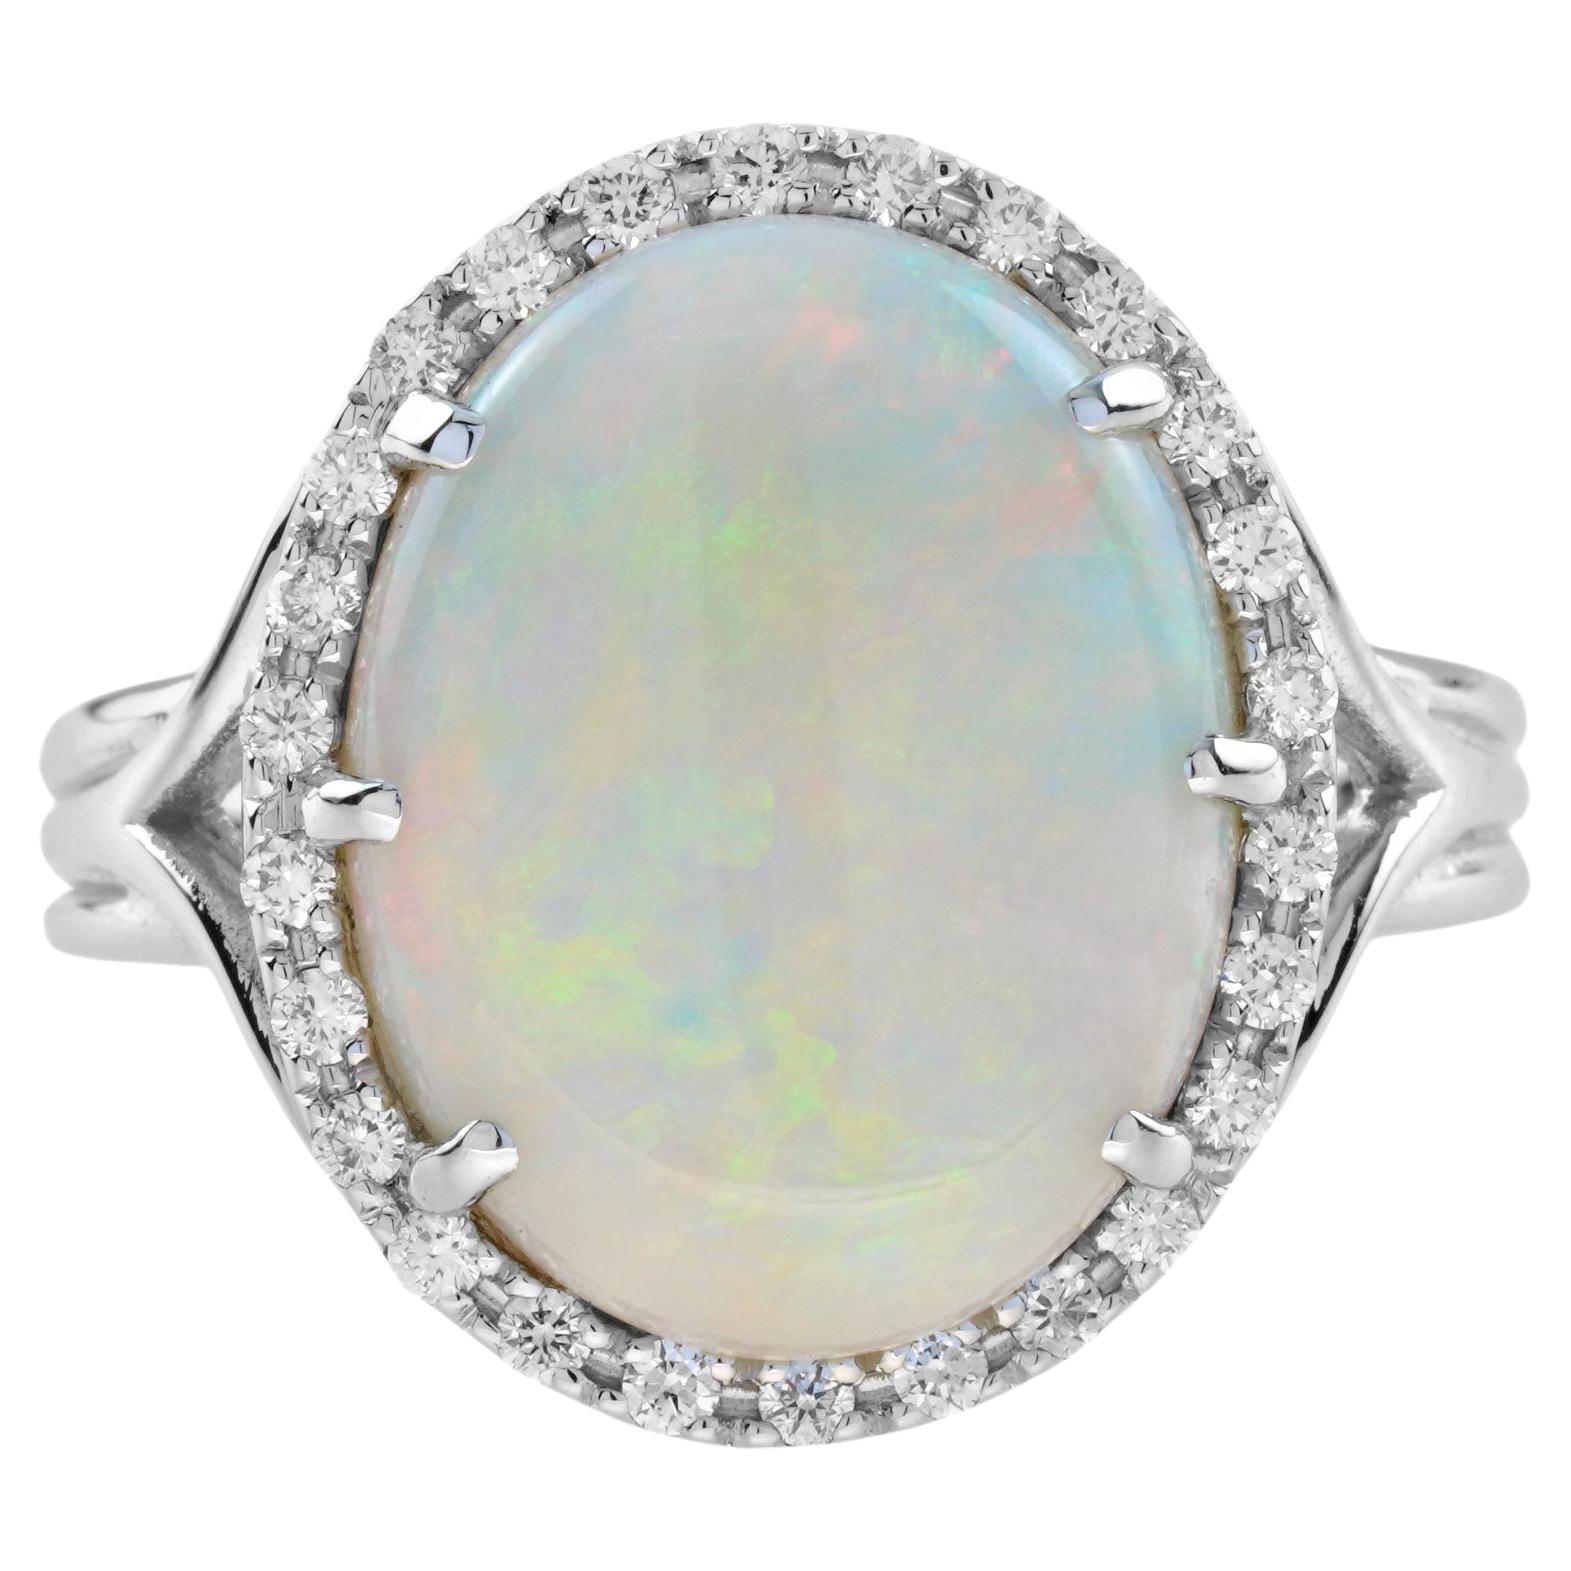 4.22 Ct. Opal and Diamond Vintage Style Cocktail Ring in 18K White Gold For Sale